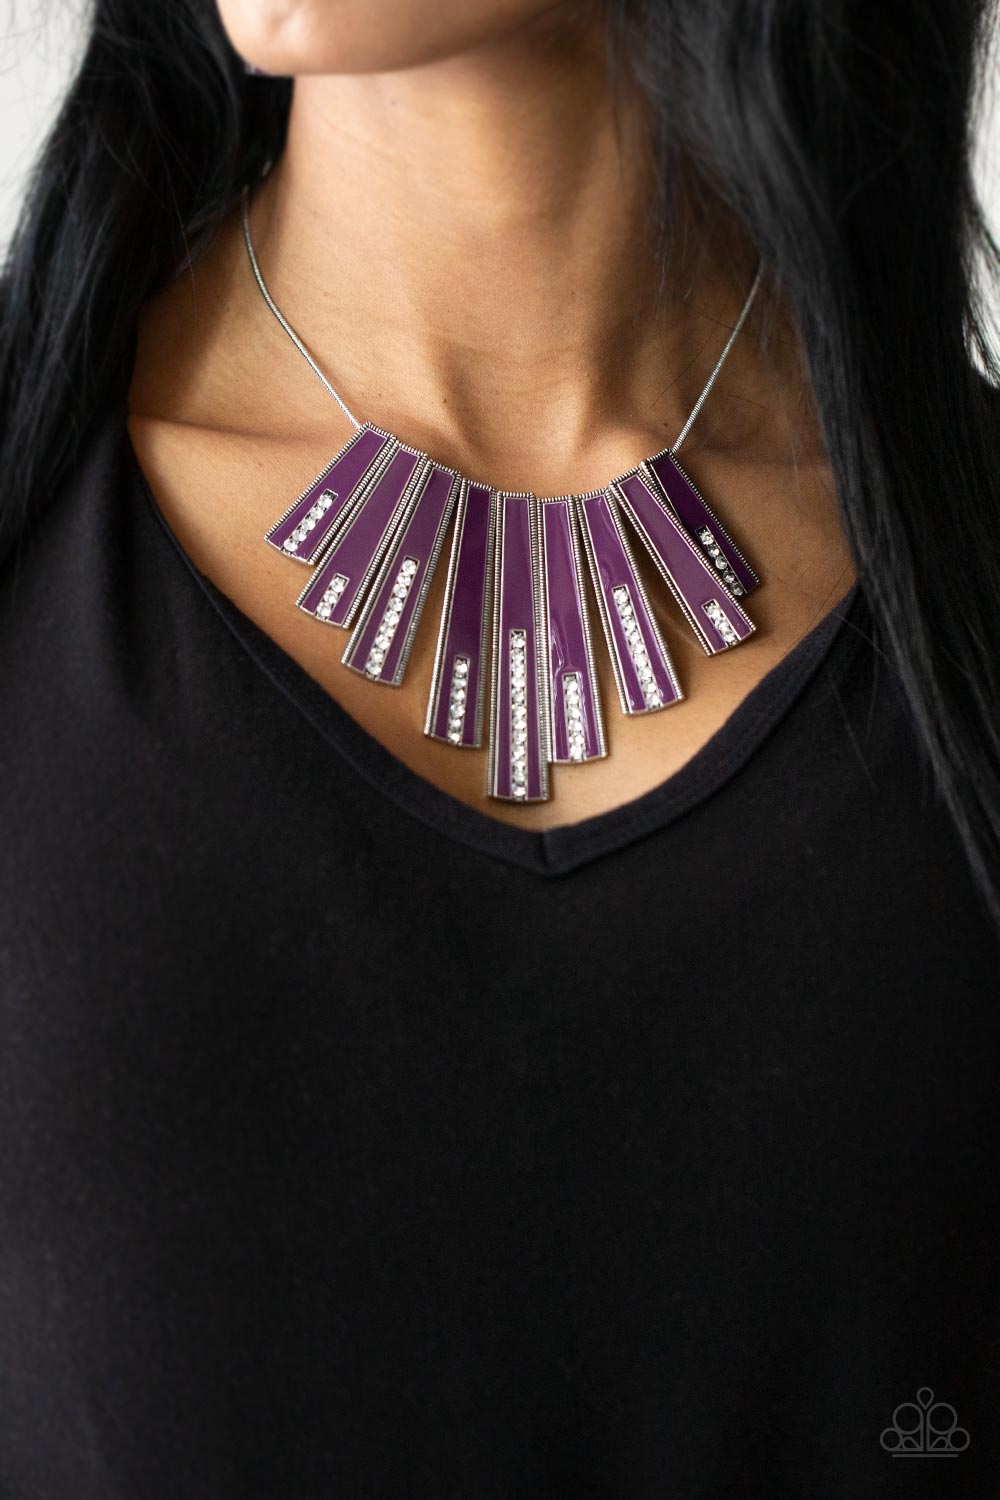 FAN-TASTICALLY Deco - Purple Flared Necklaces encased in daintily dotted silver frames, a row of flared silver bars painted in a glossy purple, fans out across the collar. A column of sparkling white rhinestones rises from the bottom of each frame, creating a dramatically deco finish as they sway from a round silver chain. Features an adjustable clasp closure.